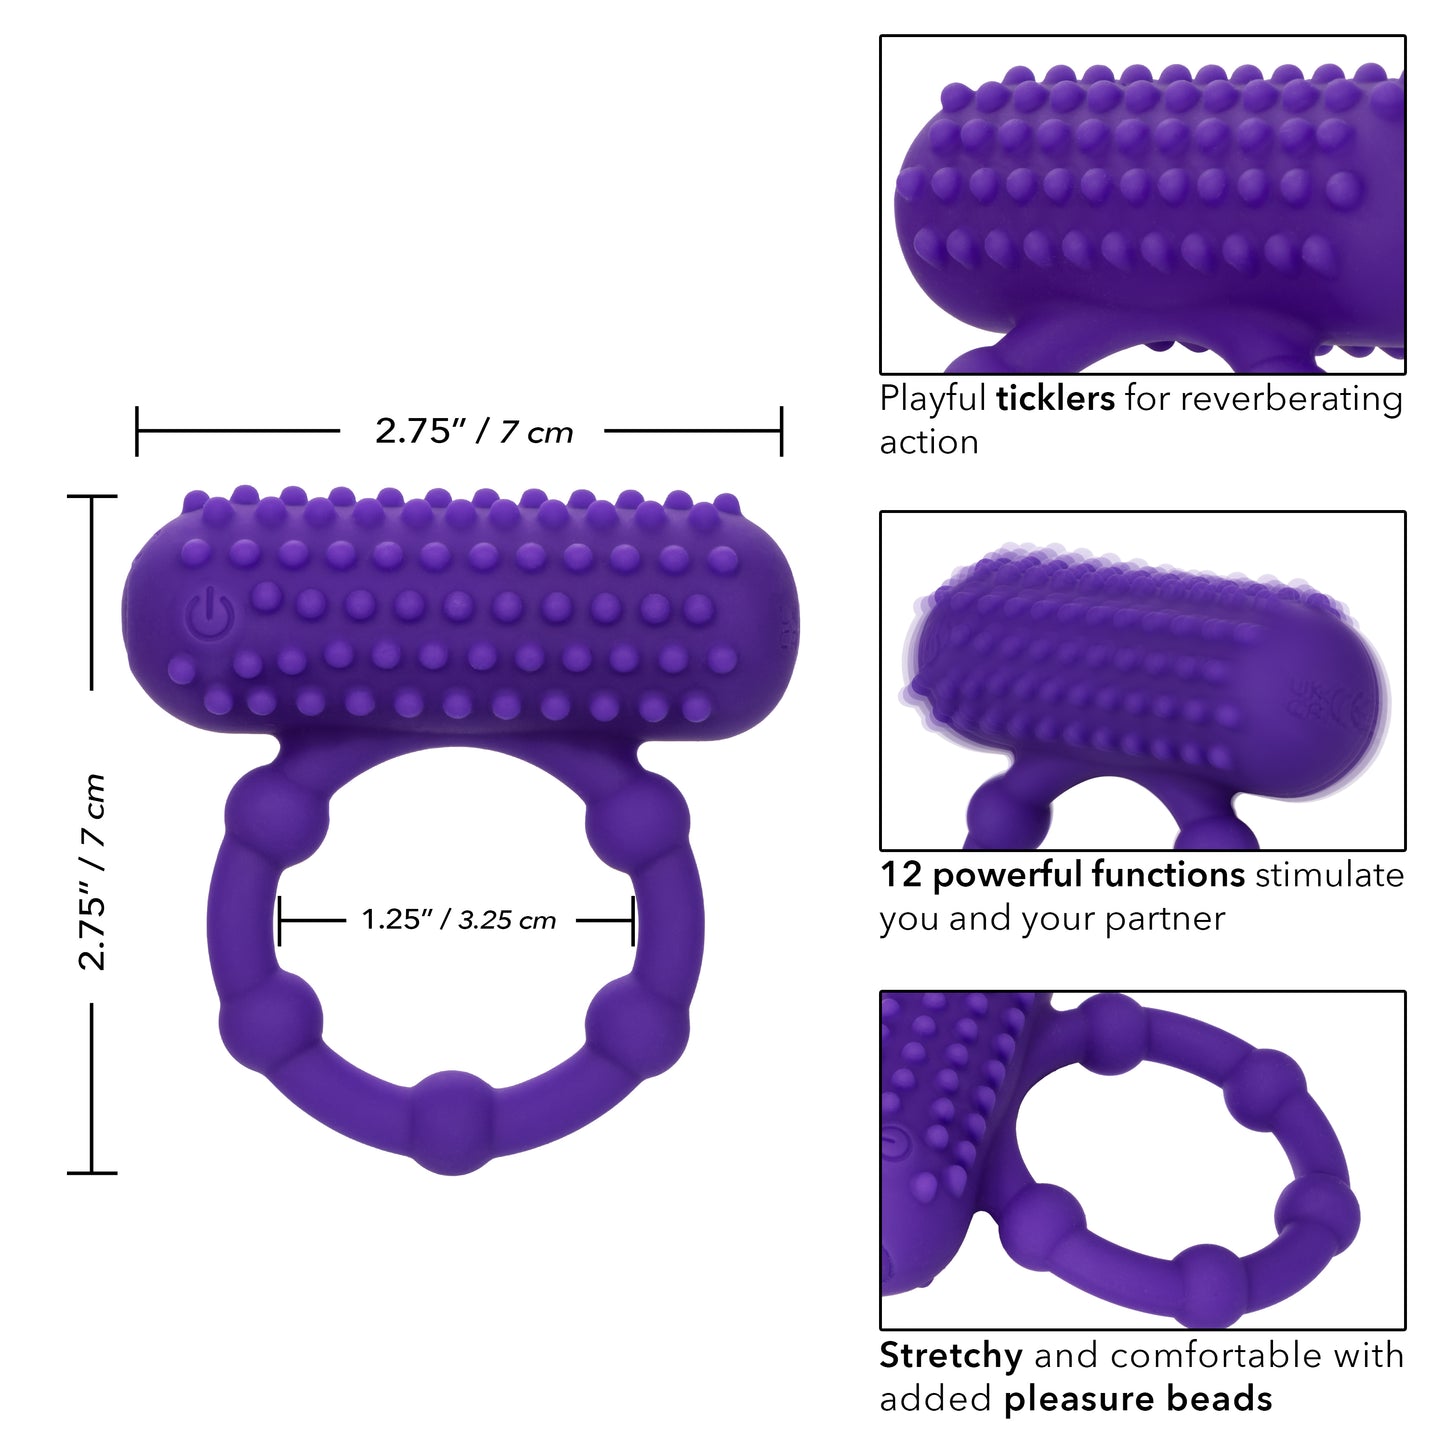 Silicone Rechargeable 5 Bead Maximus® Ring